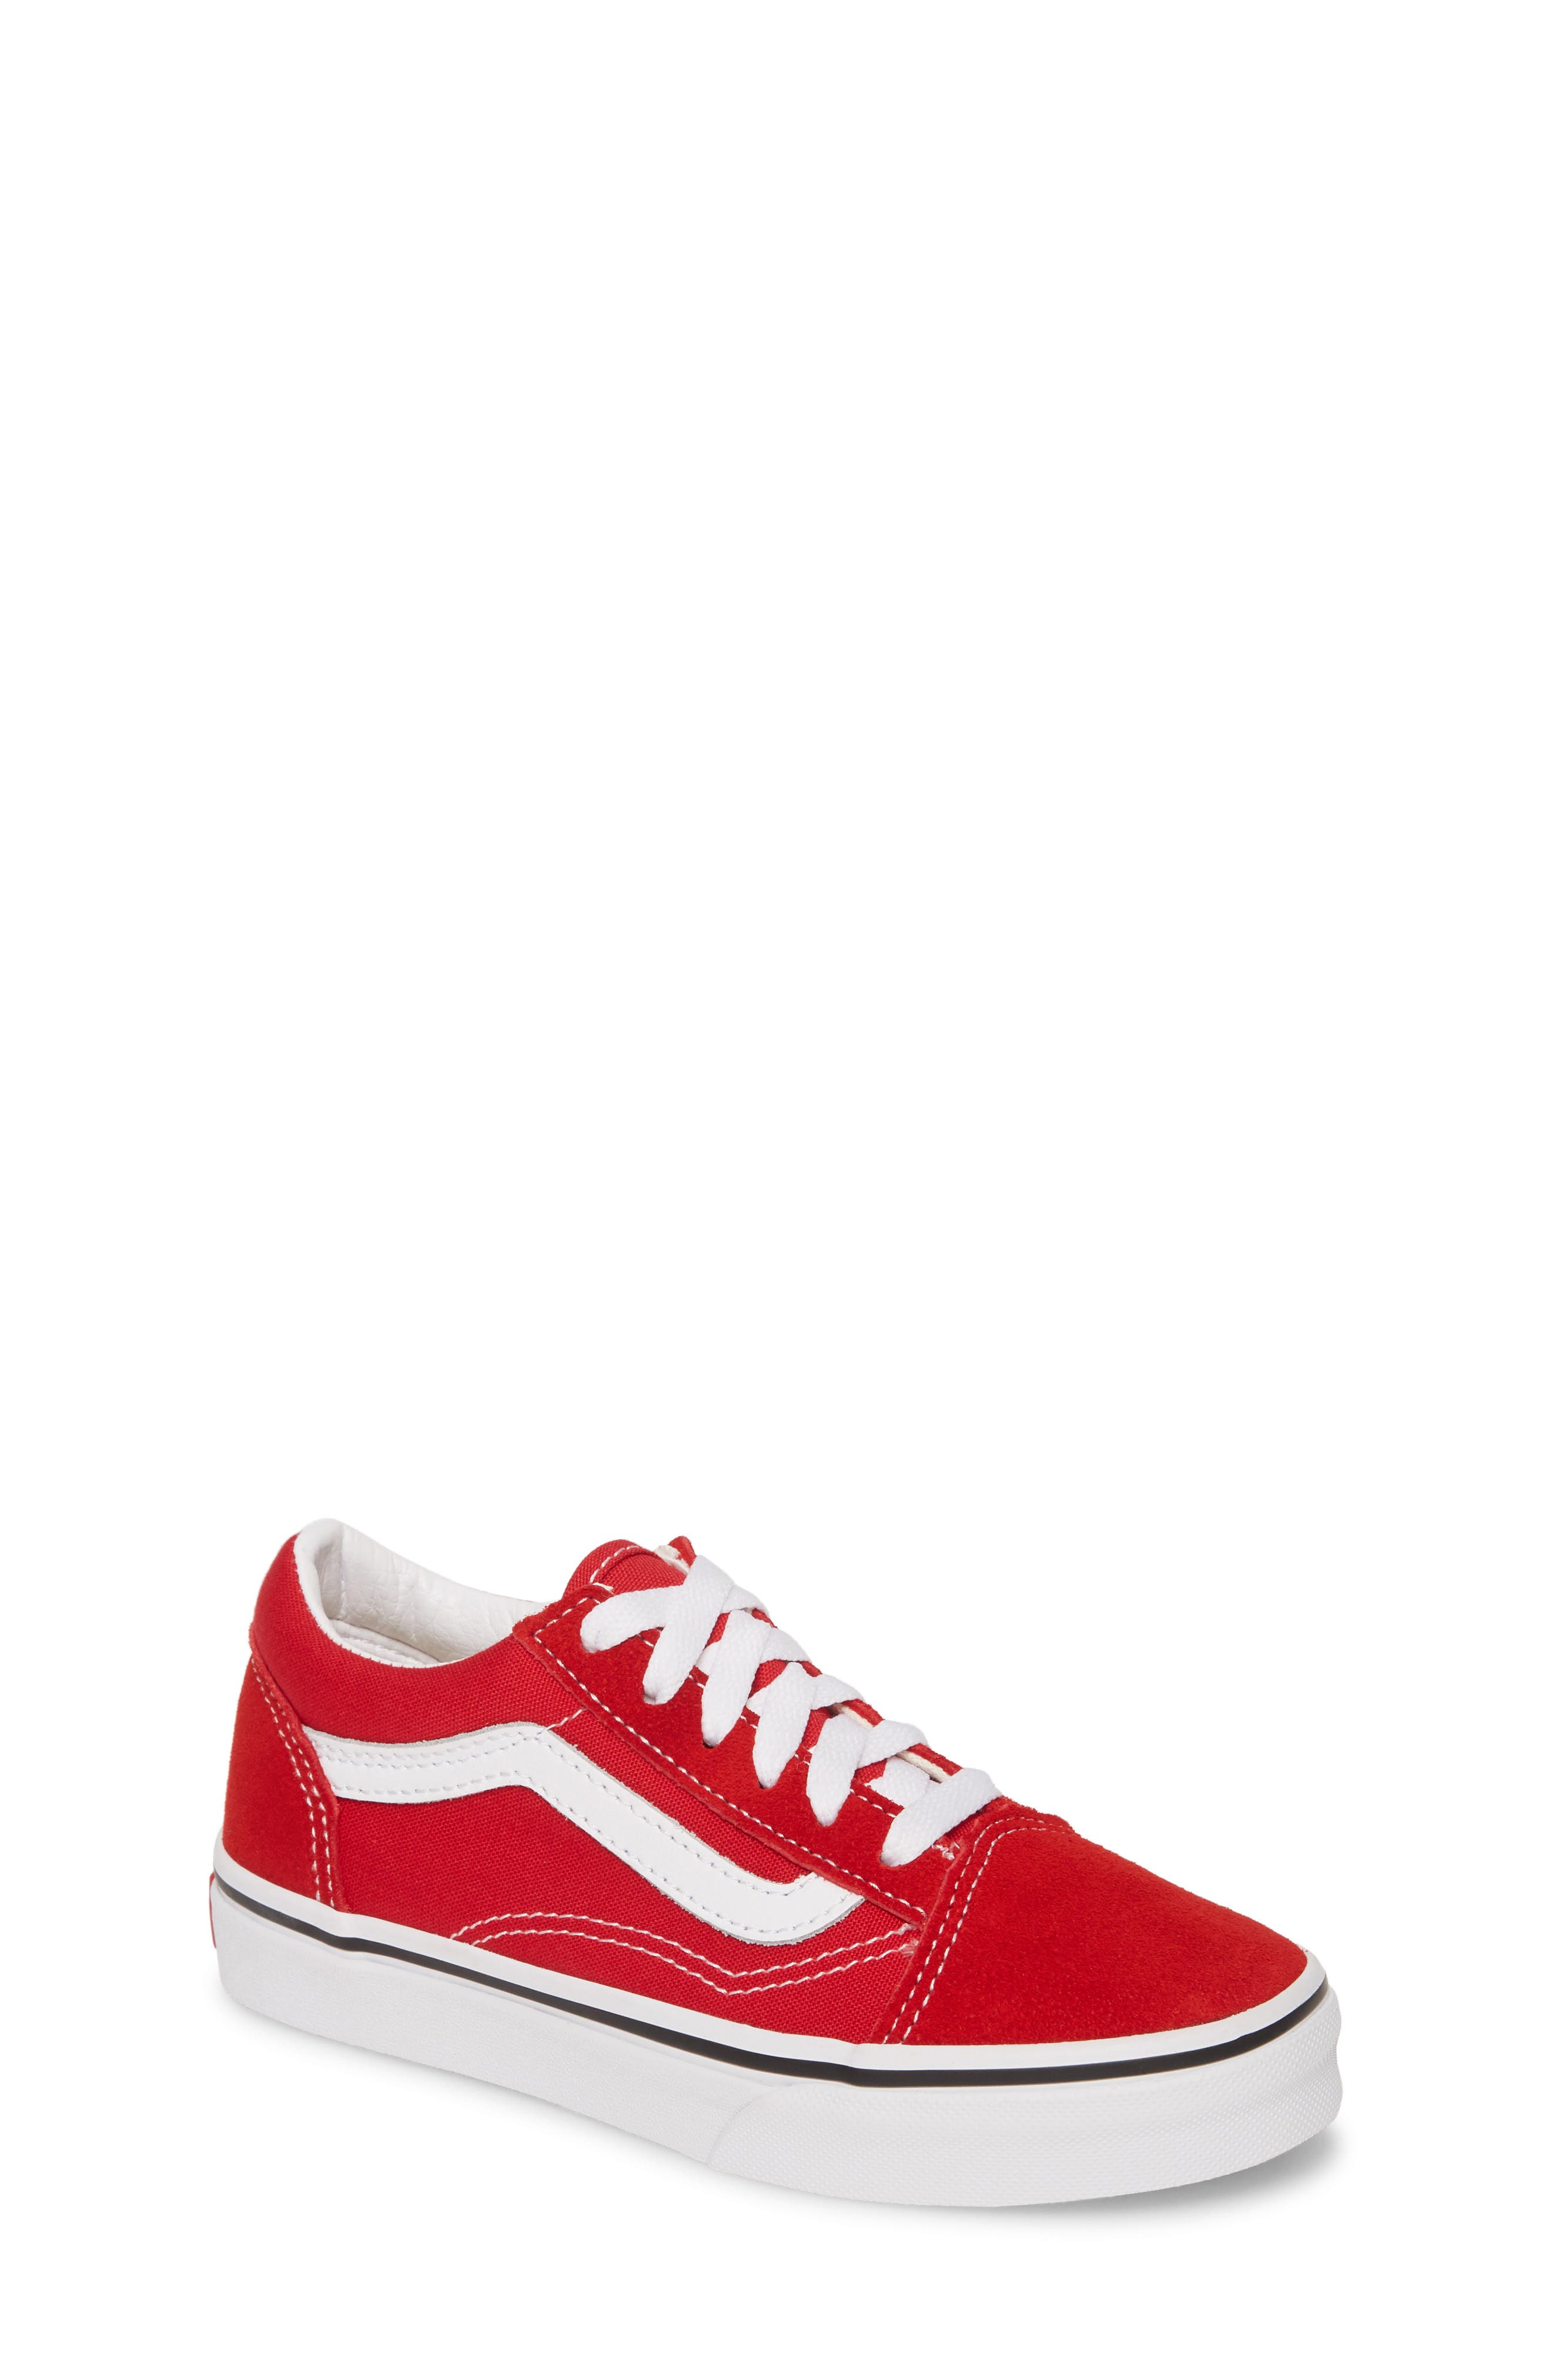 red and white vans kids